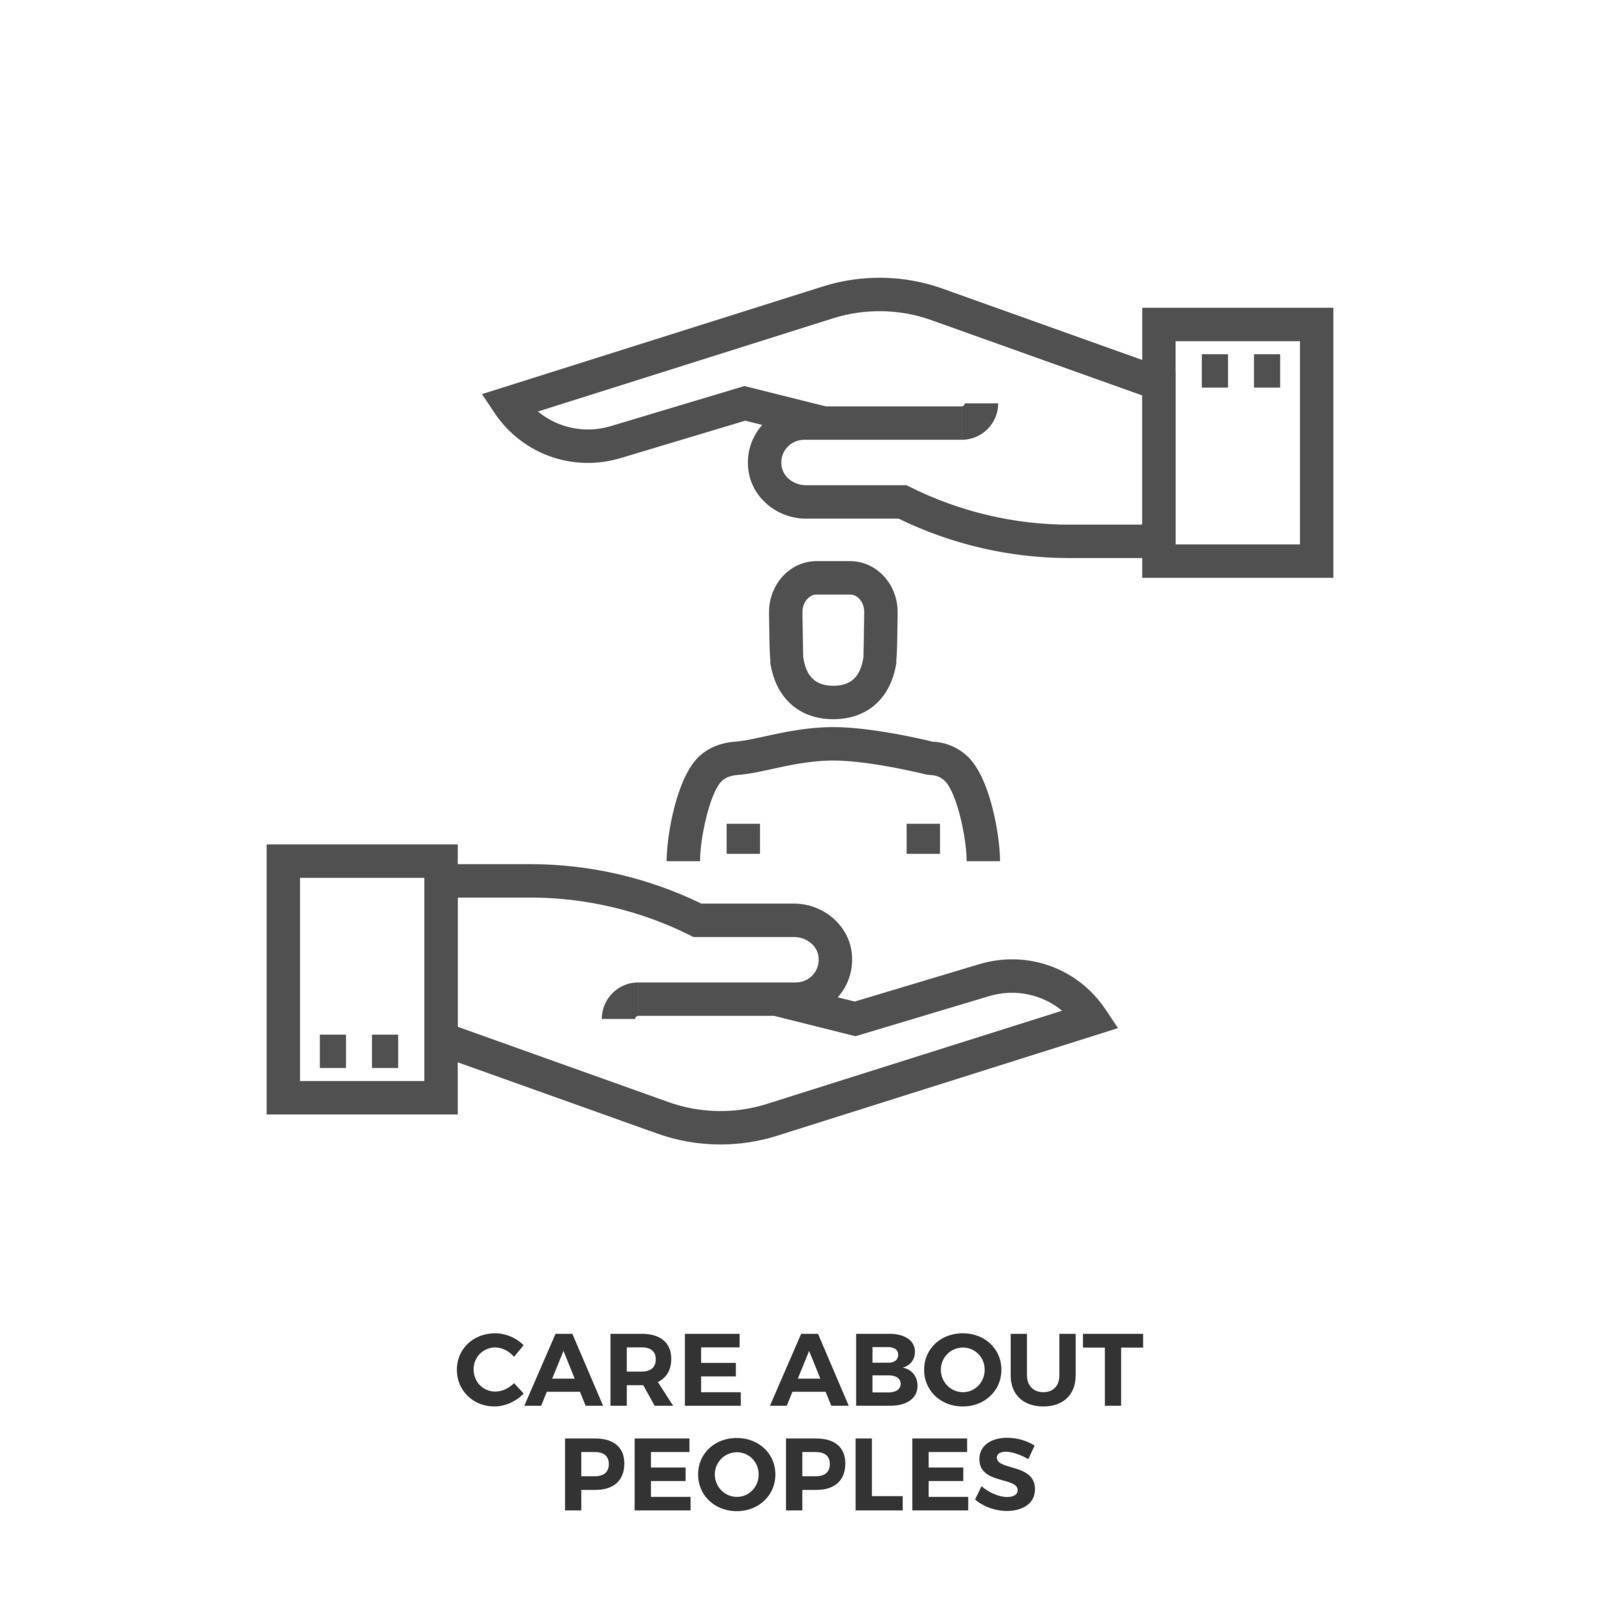 Care about peoples by smoki